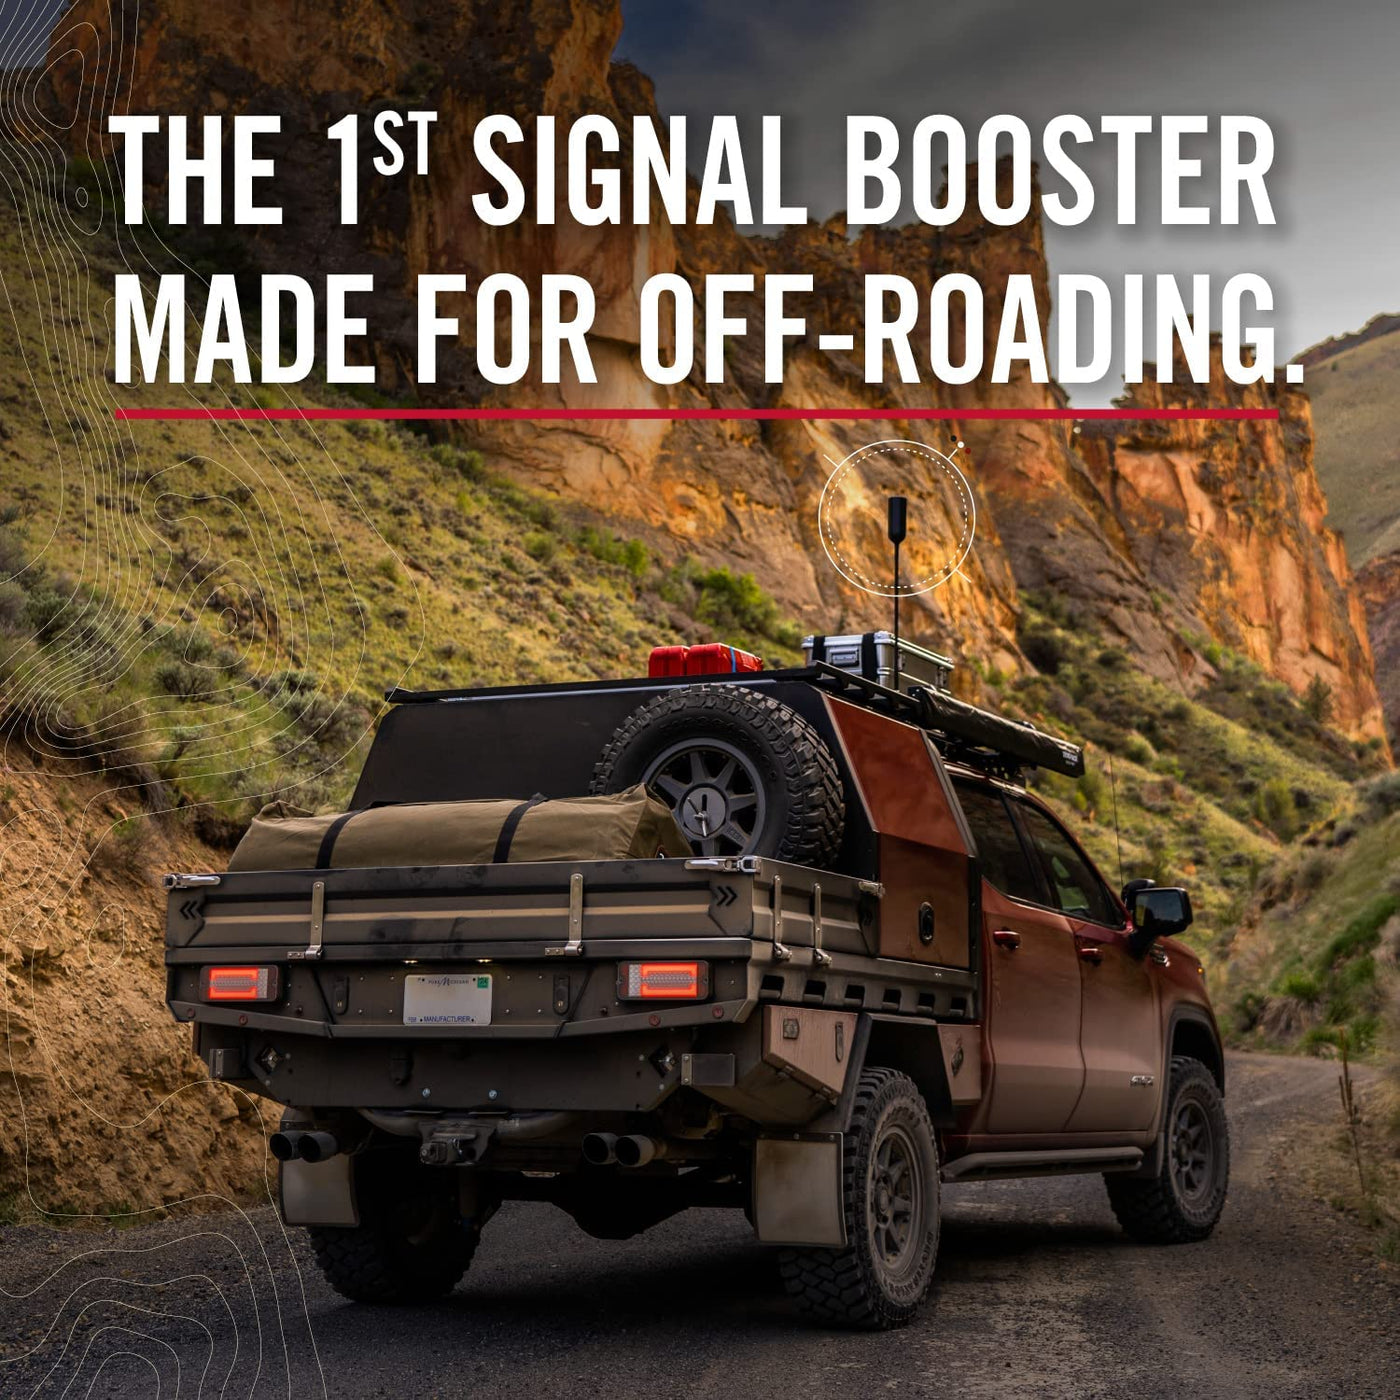 WeBoost 472061 Drive Reach Overland Cell Phone Signal Booster For Overlanding & Off-Roading